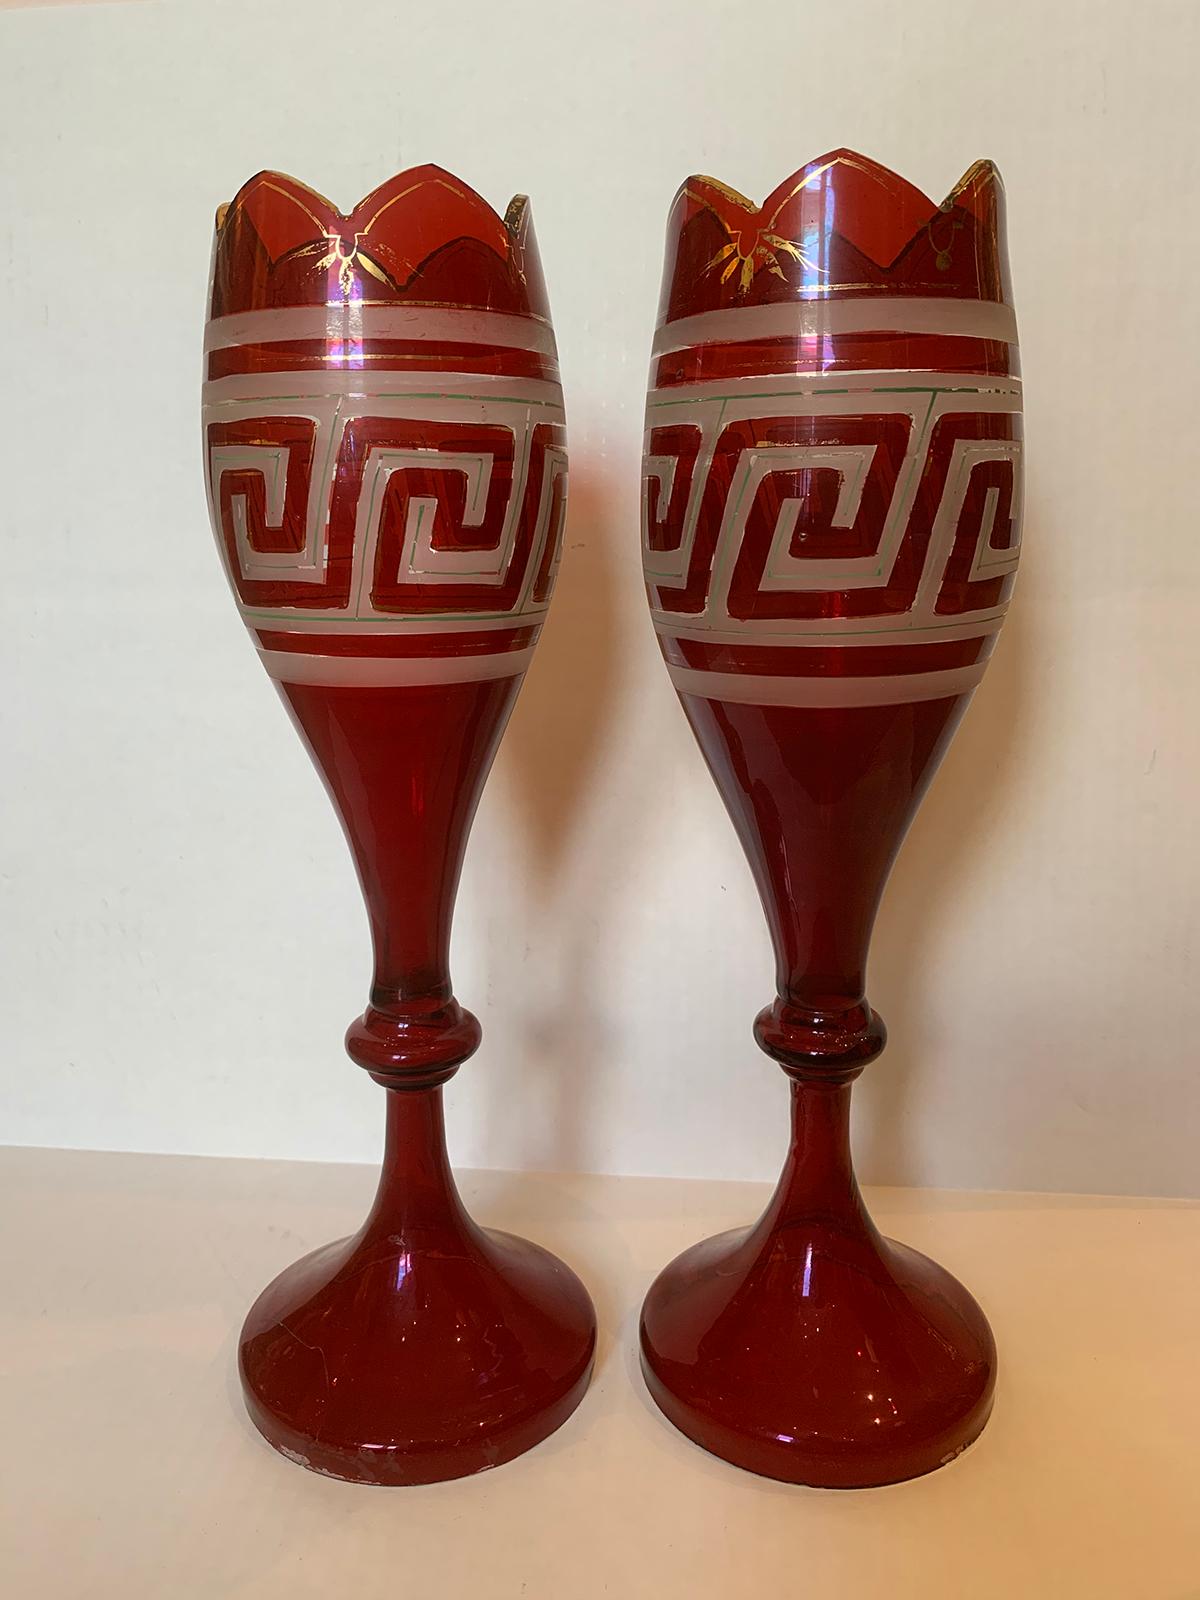 Pair of early 20th century etched Greek Key red glass vases with gilt detail.